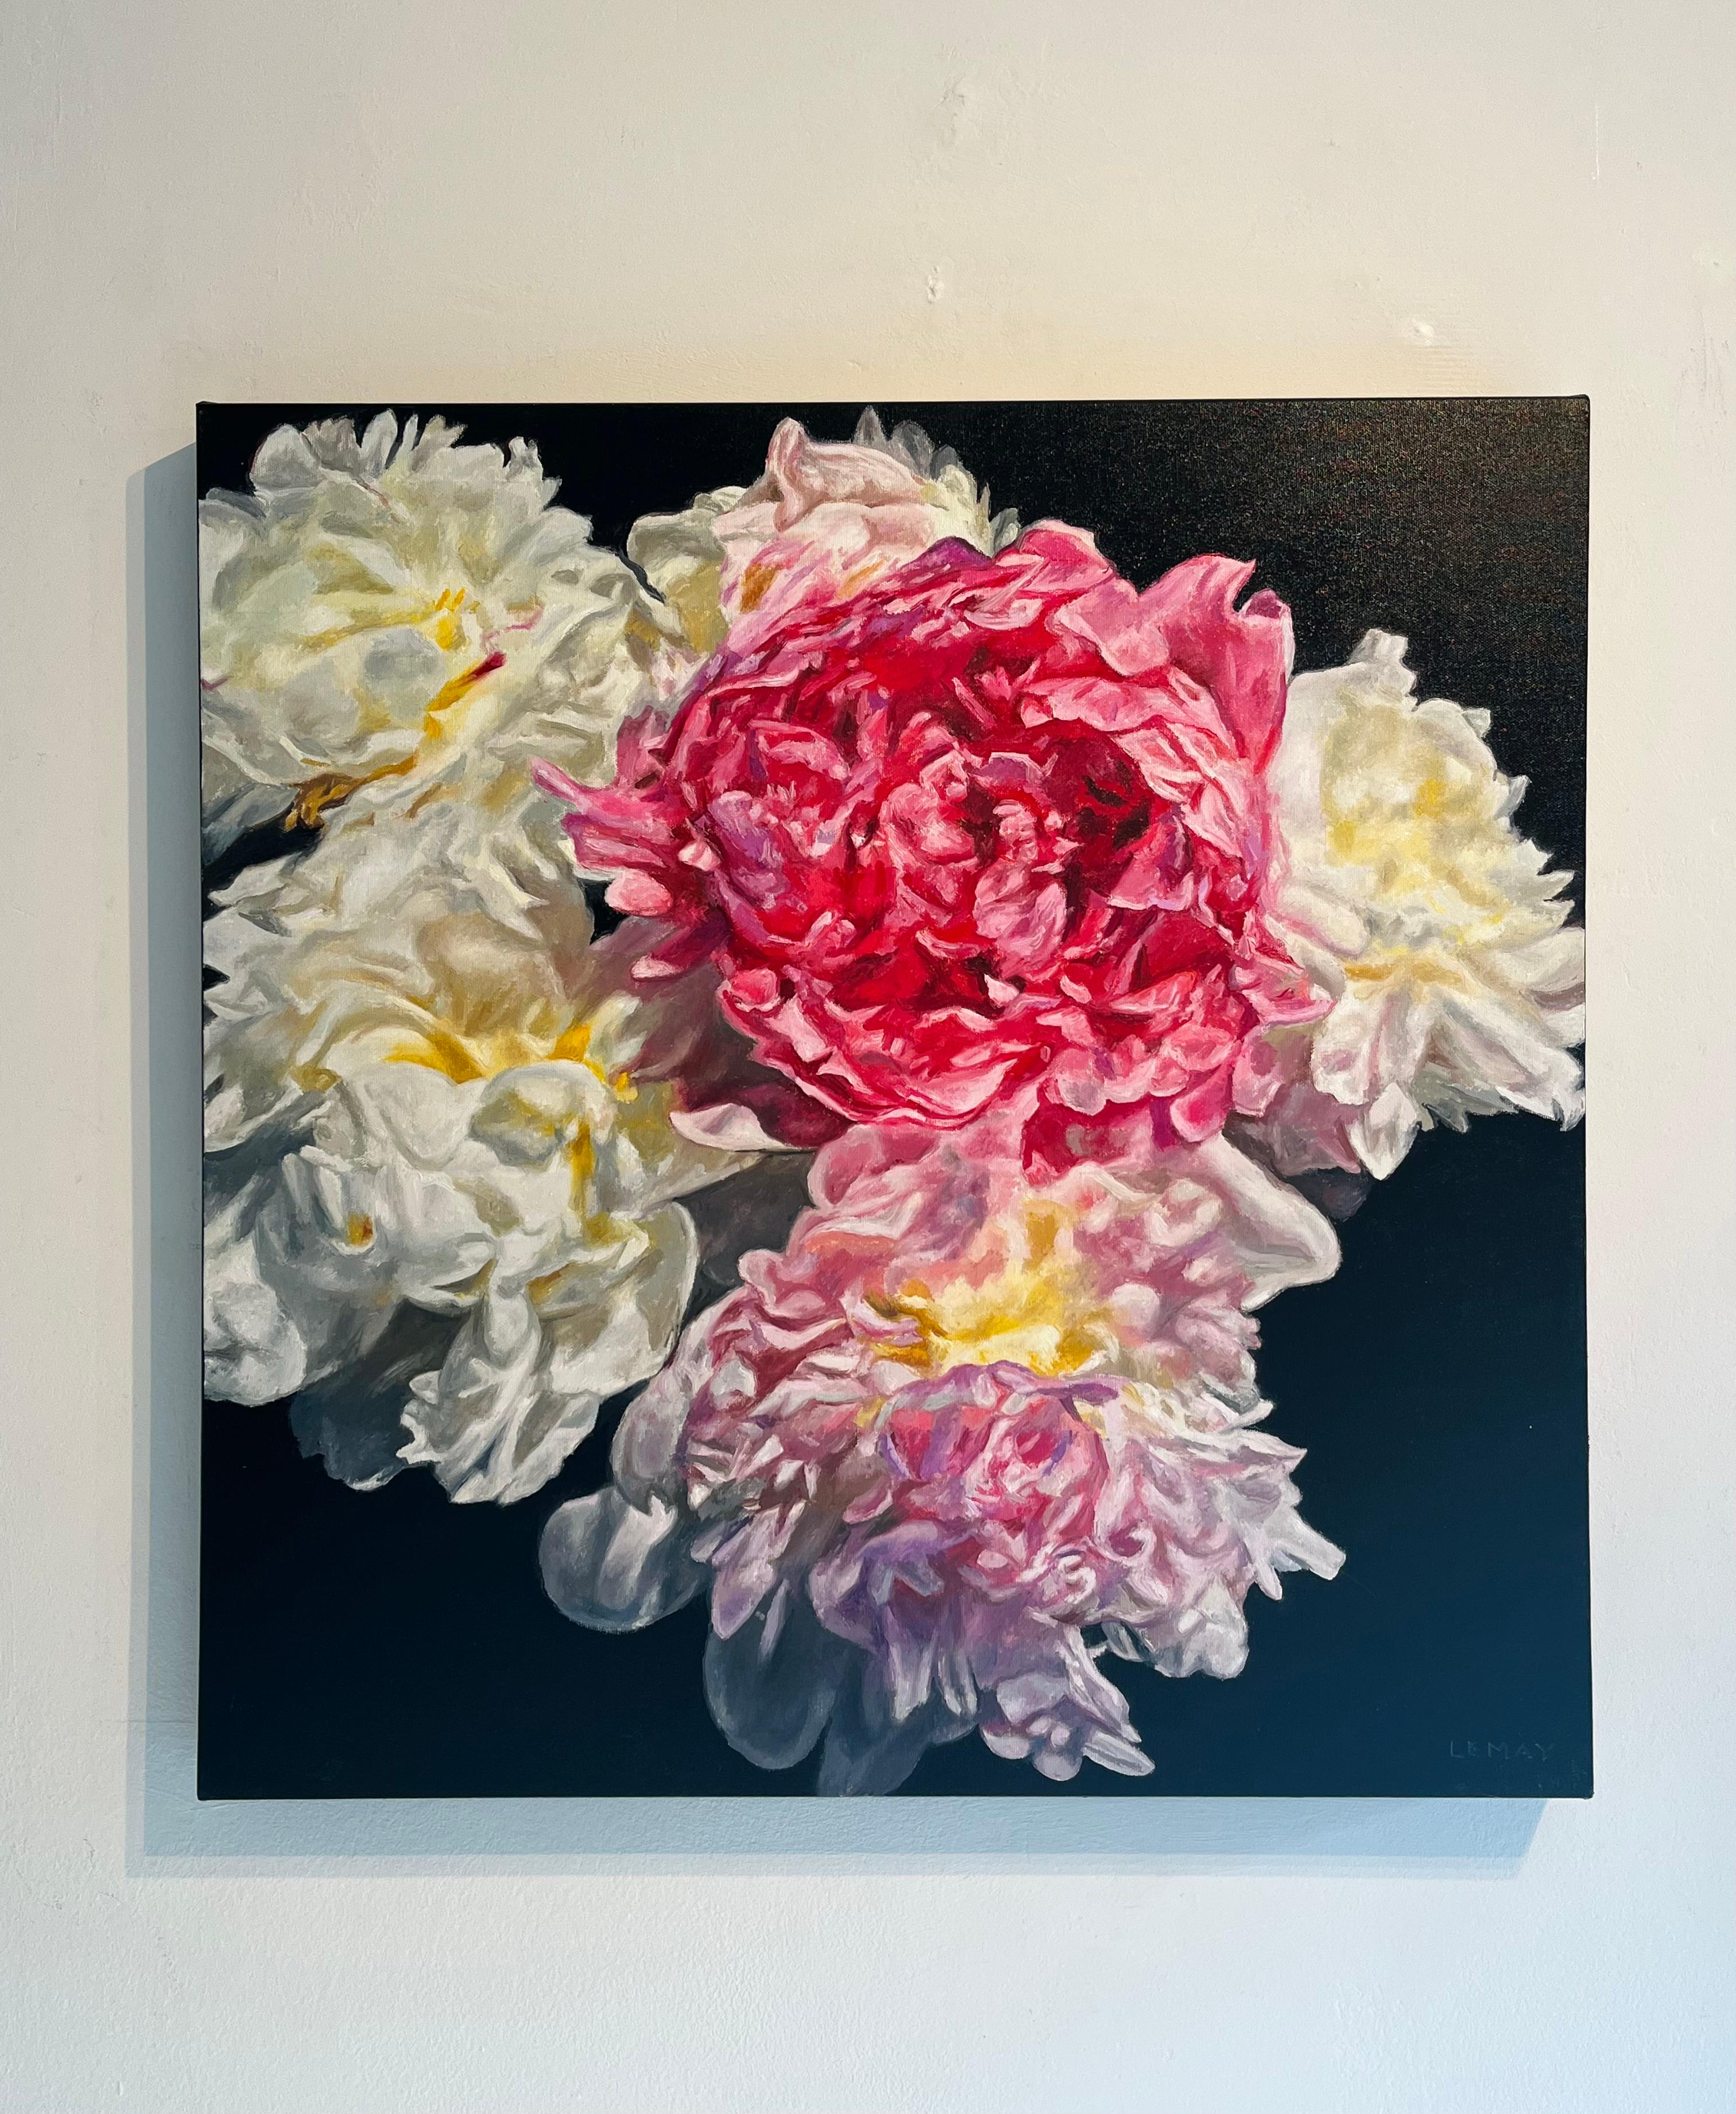 White an Pink Peonies-original modern realism floral painting-contemporary Art - Painting by Robert Lemay